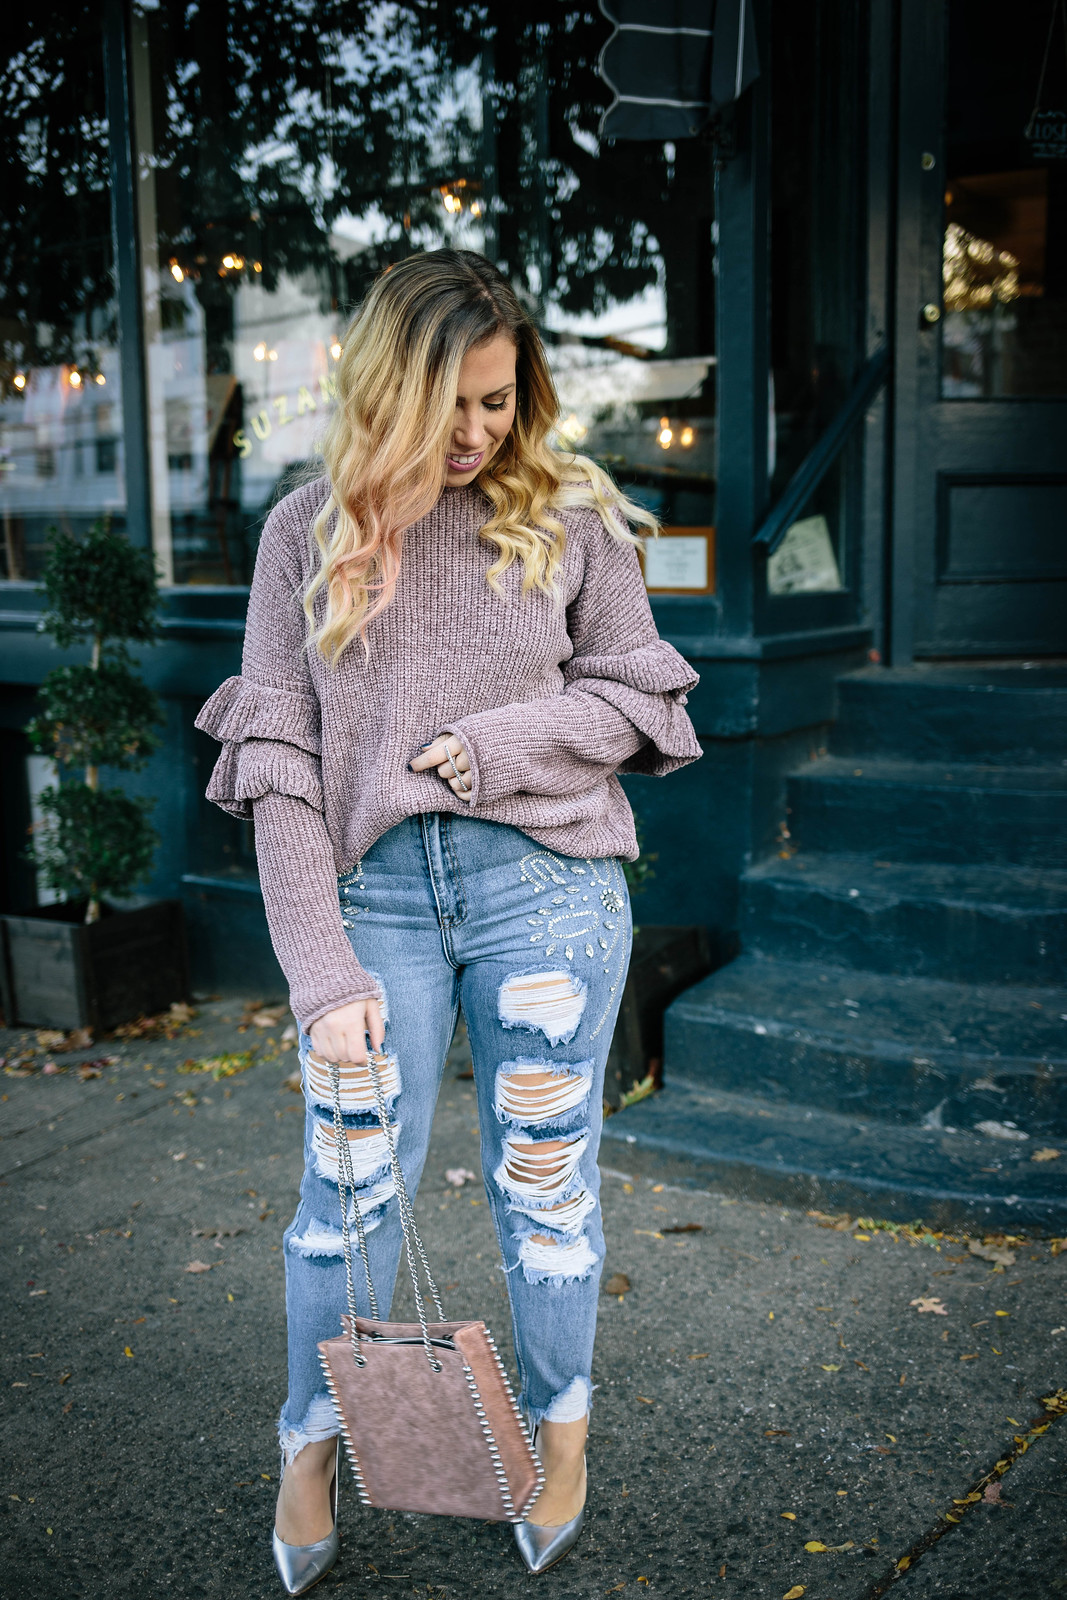 ASOS Glamorous Boyfriend Jeans With Distressing And Gem Embellishment